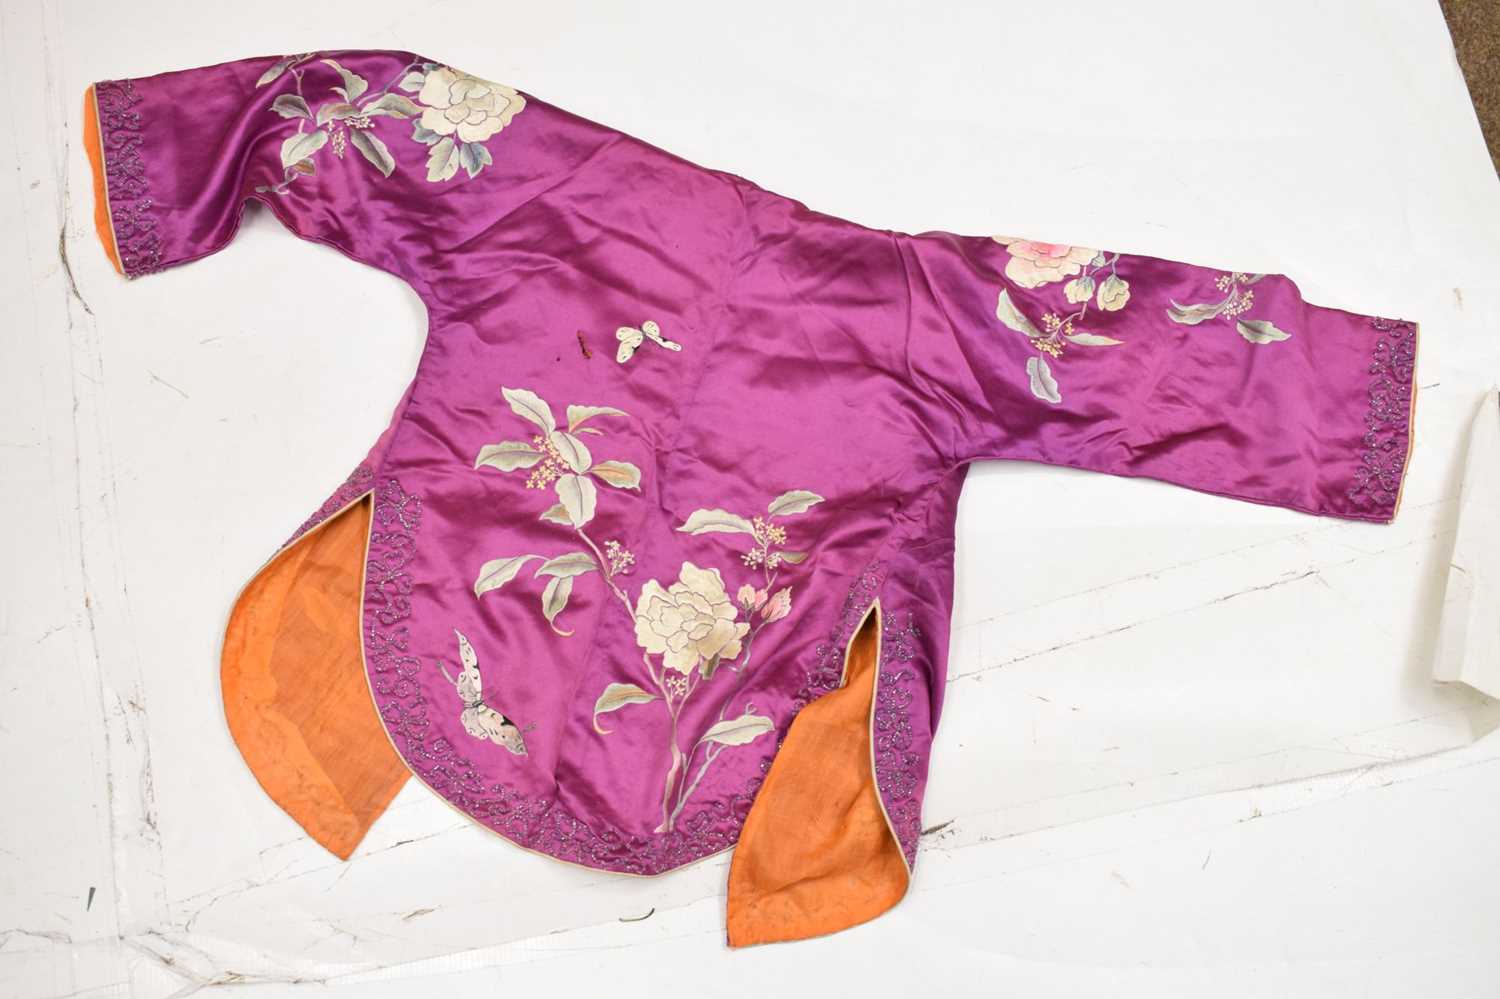 Lady's Chinese embroidered purple silk jacket and trousers, circa 1900 - Image 9 of 18